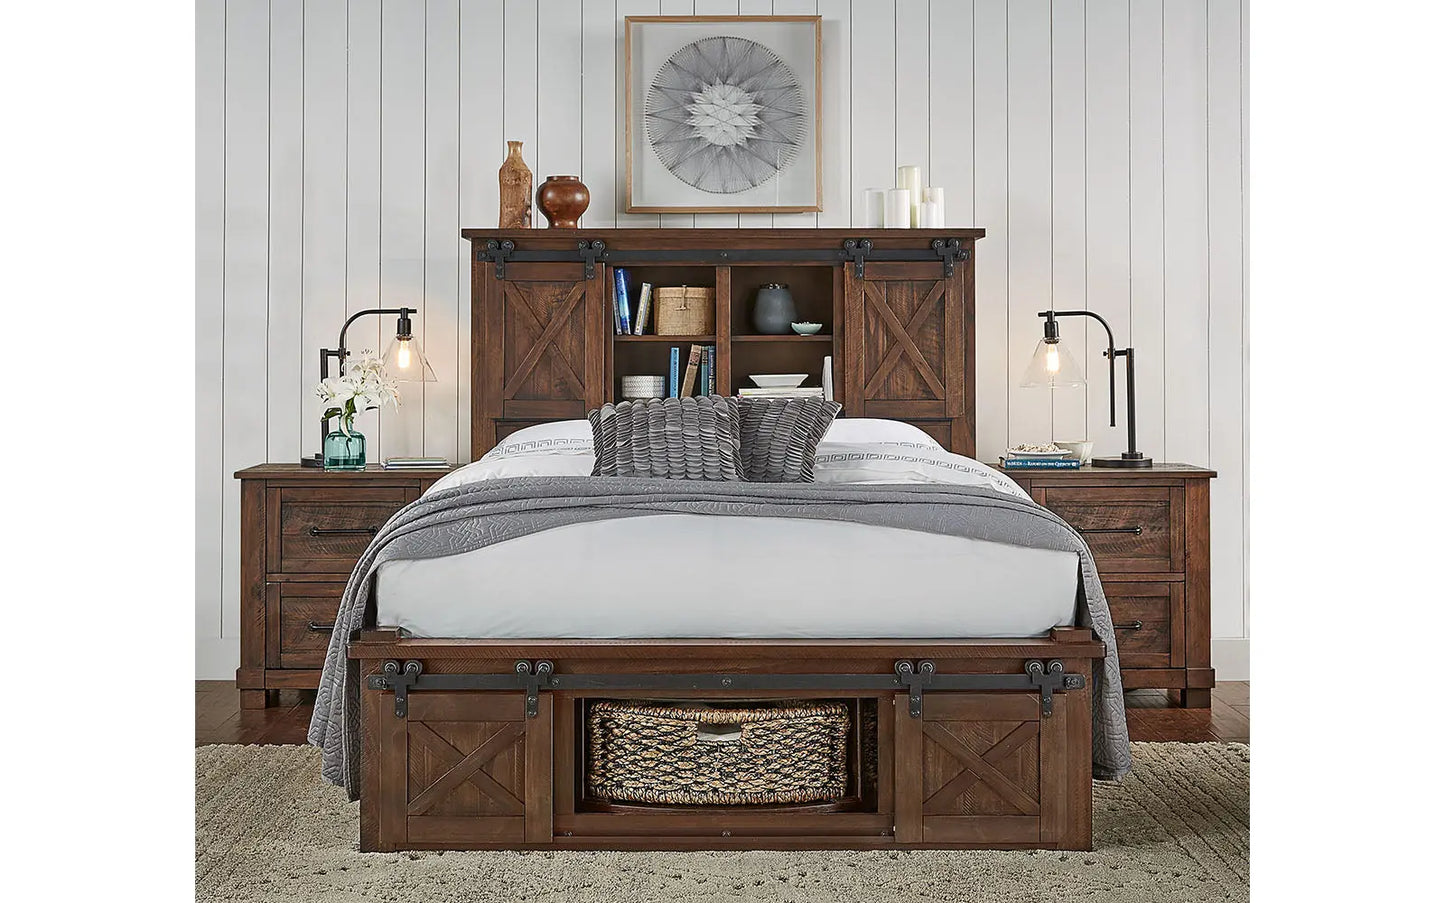 Sun Valley Rustic Timber Cal-King Storage Hdbr W/ Rotating Storage A-America